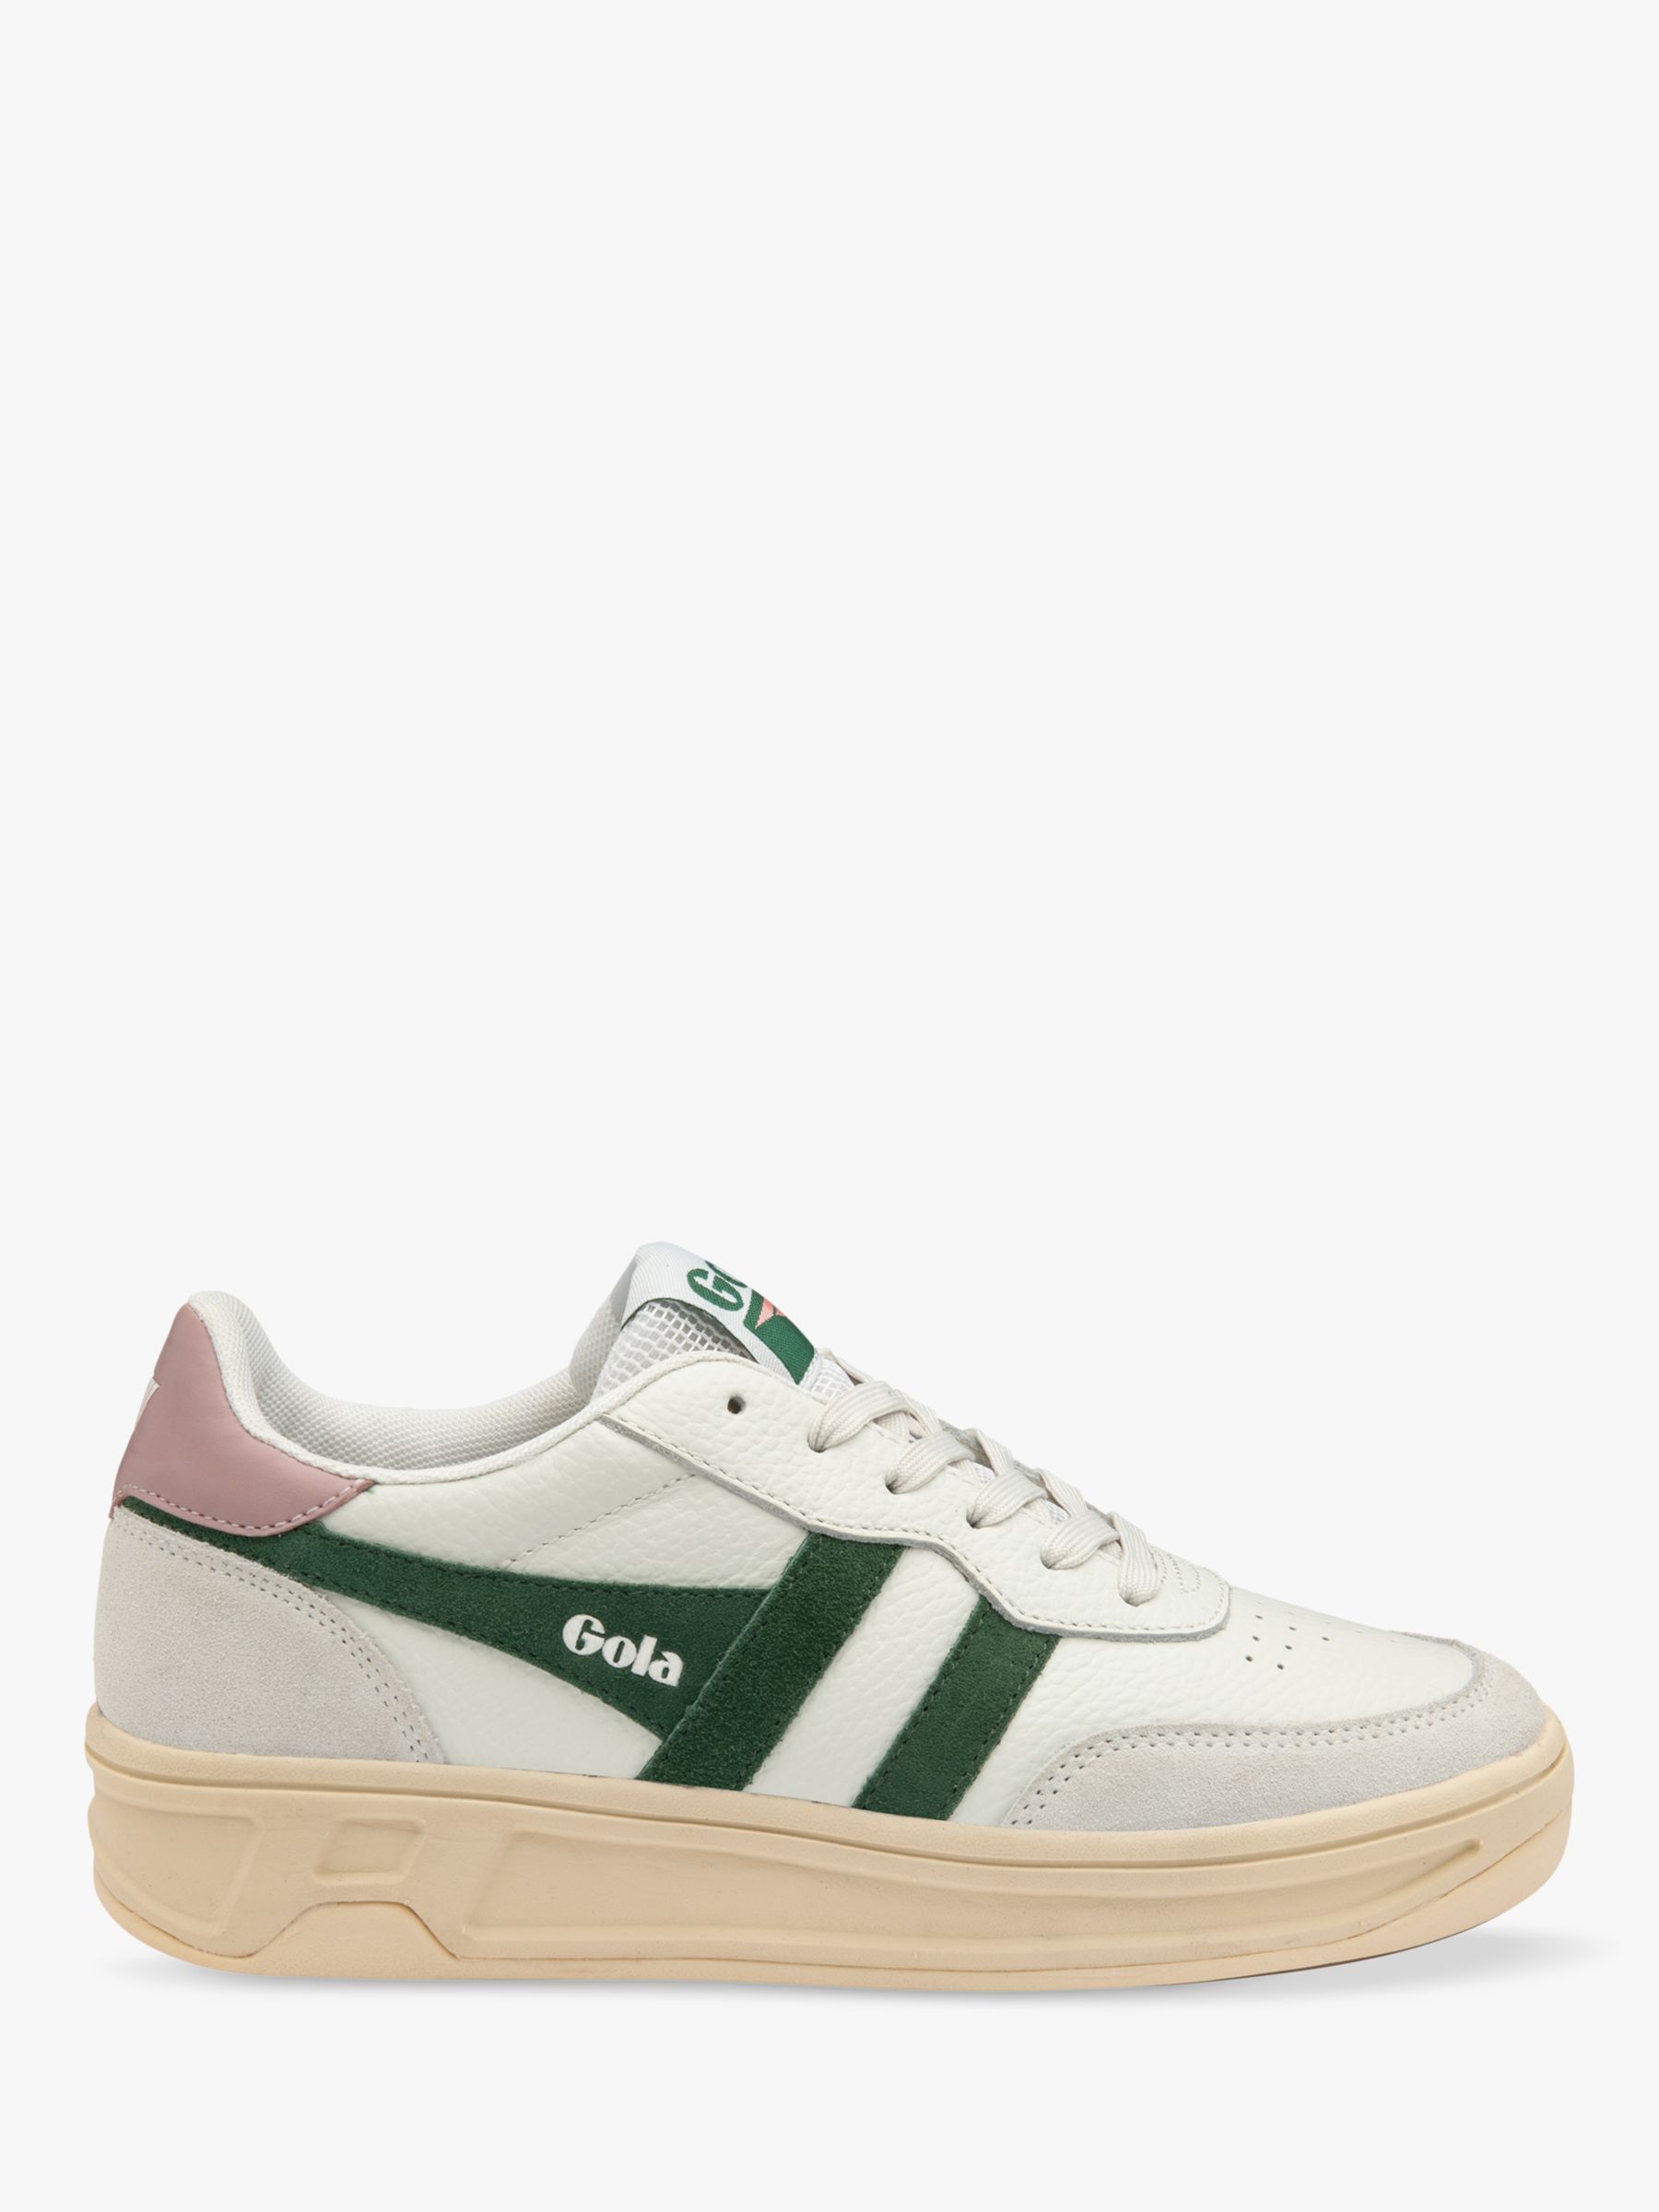 Gola Classics Topspin Leather Lace Up Trainers, White/Evergreen/Pink, 6